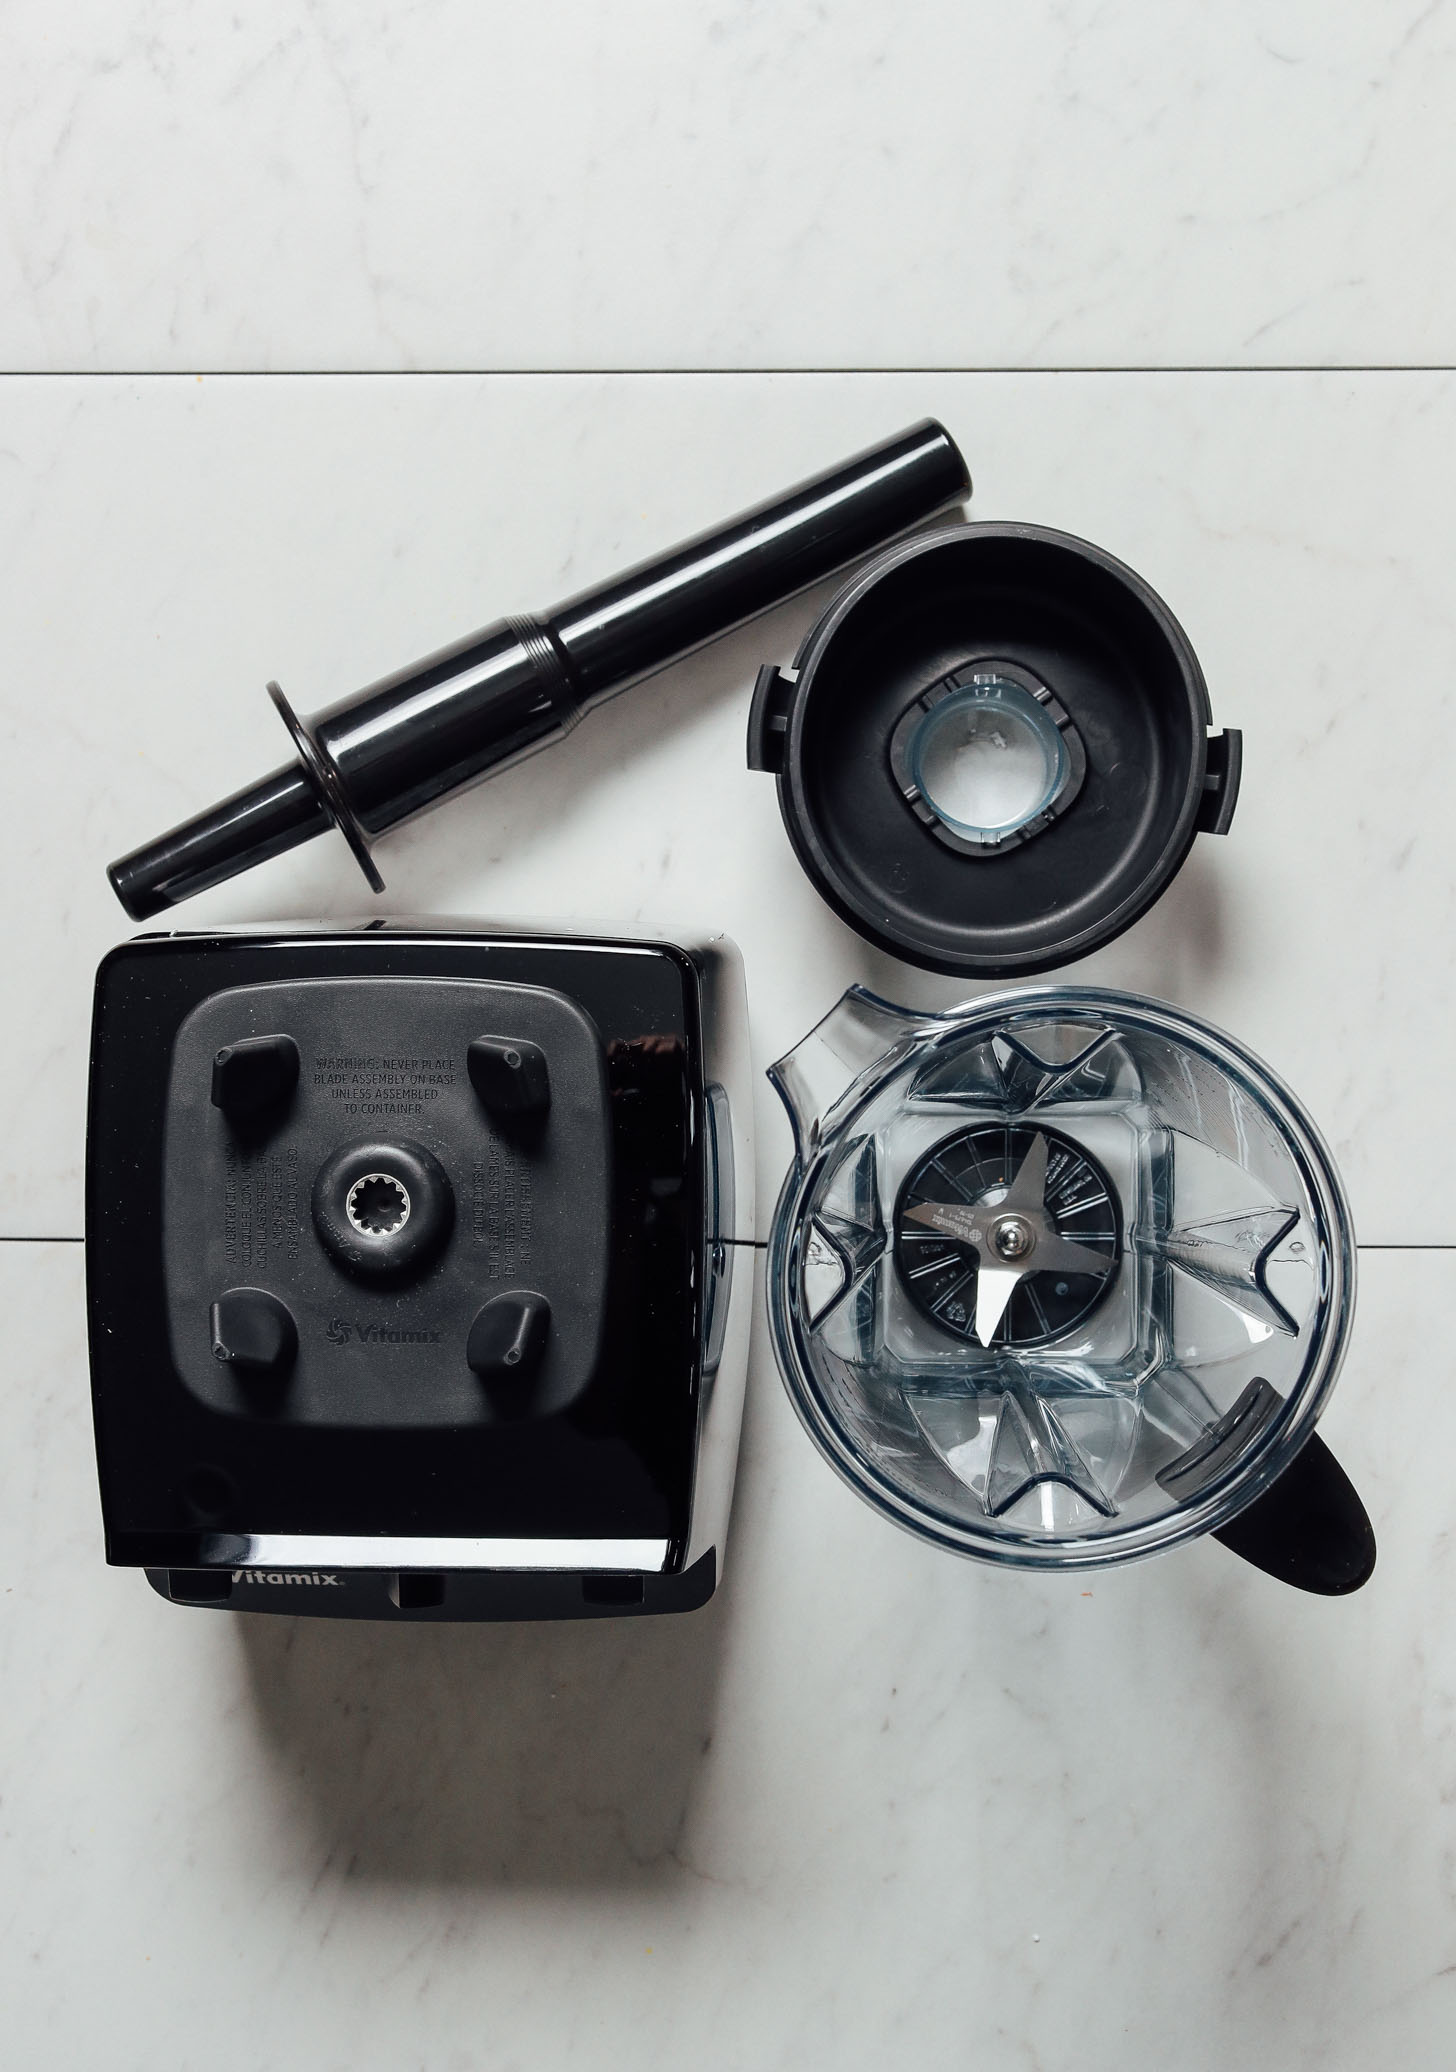 Top down shot of the Vitamix 5200 blender and all of its parts